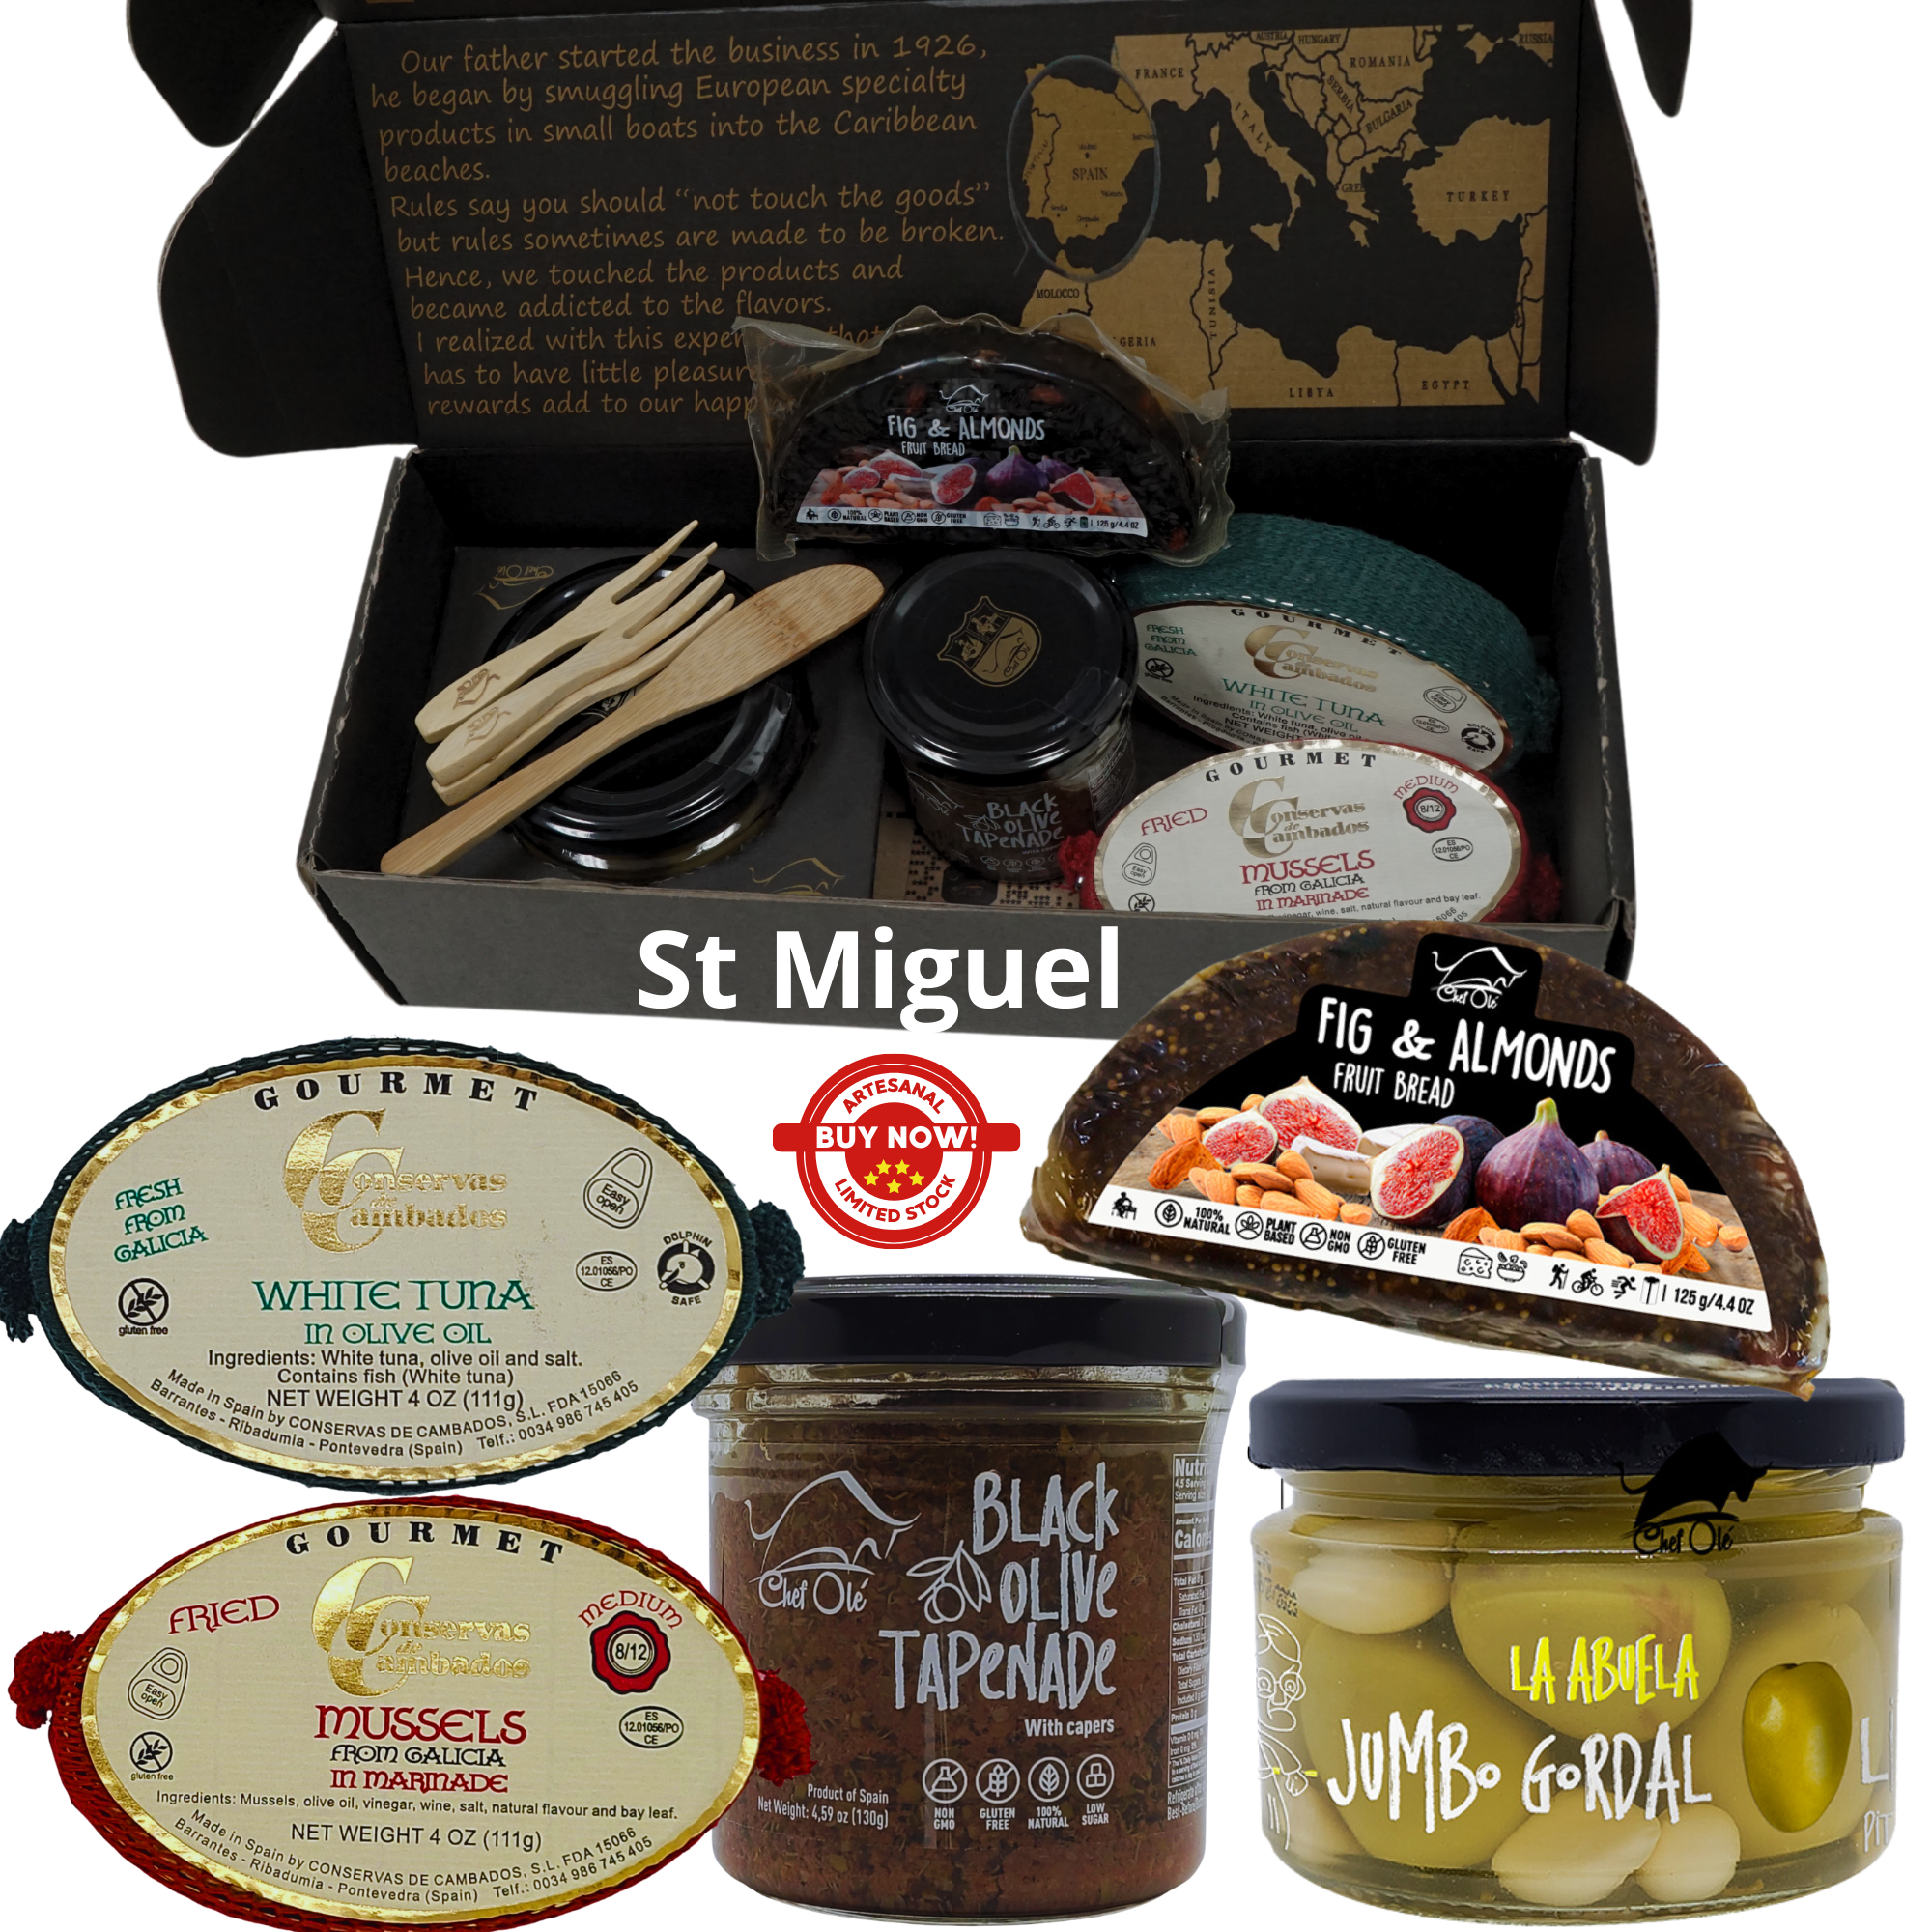 St Miguel Gourmet Gift Basket; 5 Delicious Appetizers, Ready-to-Eat Spanish Conserves and Appetizers; Black Olives, Green Olives, White Tuna, Mussels & Fig and Almond Fruit Bread; Ideal Gift Basket of Gourmet Spanish Food